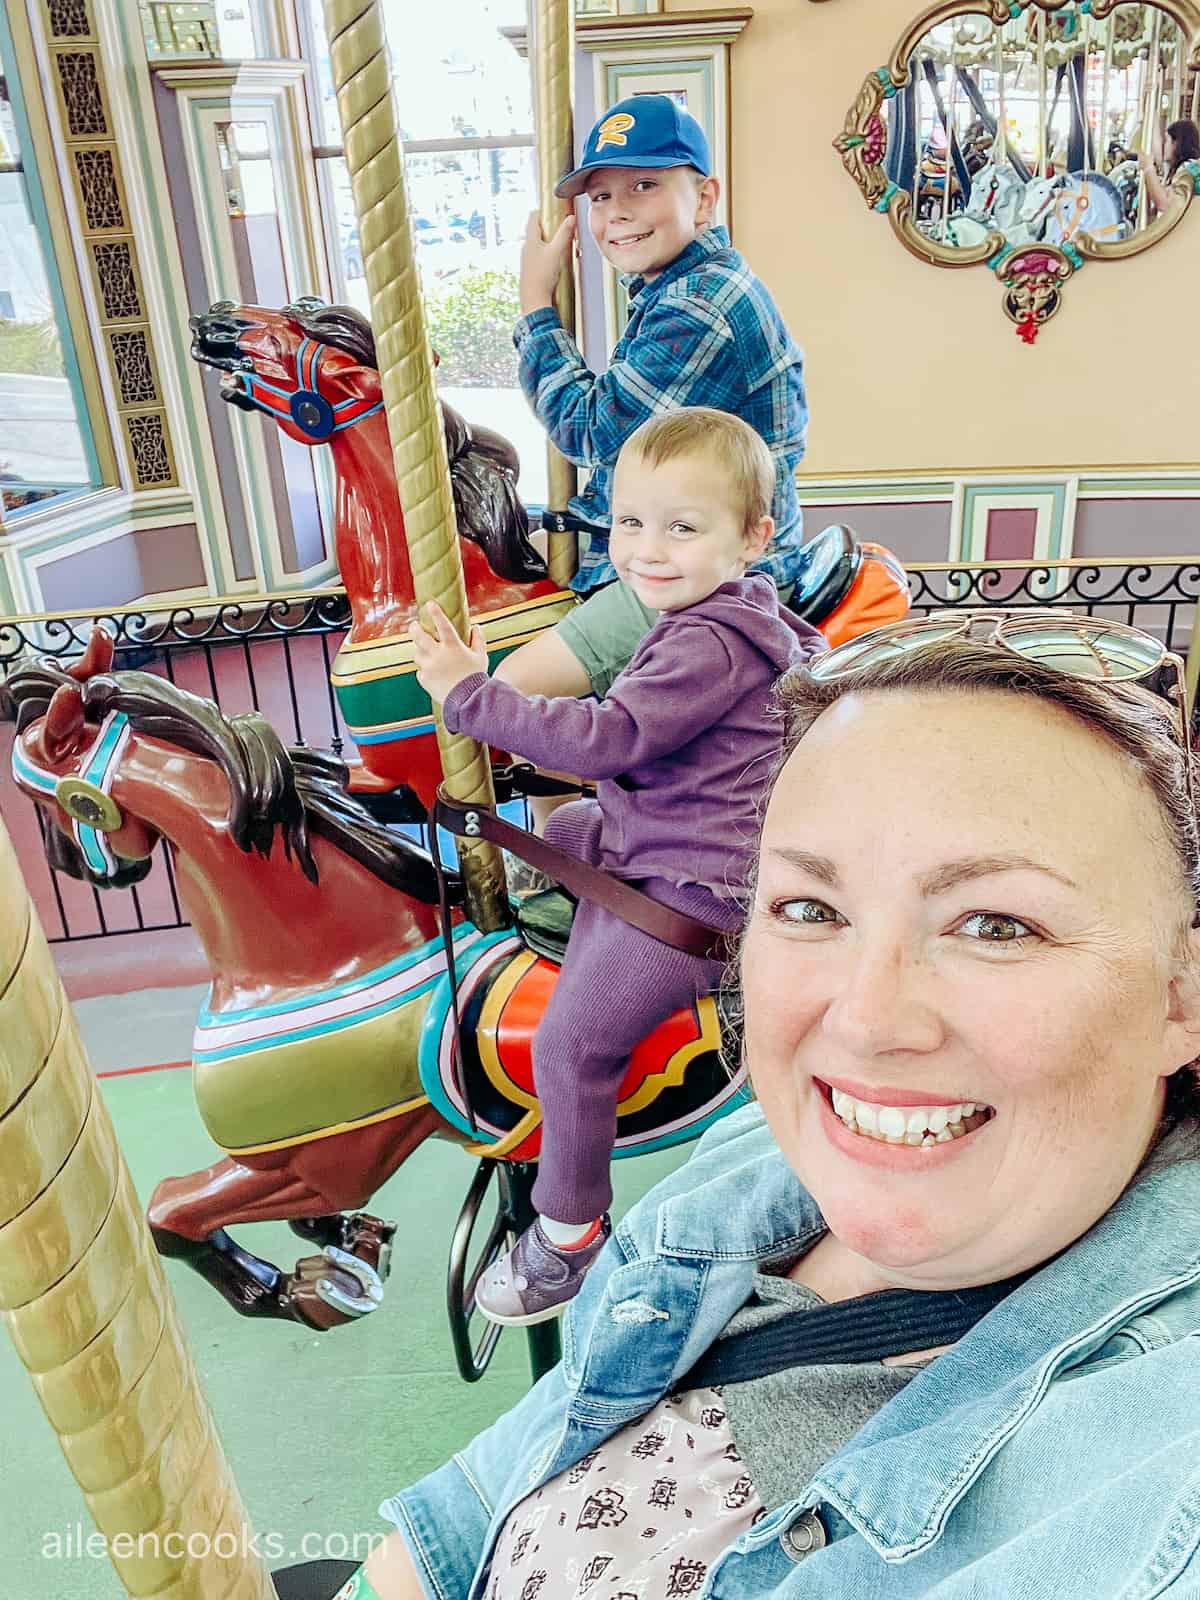 A women on a carousel with a toddler girl and young boy.